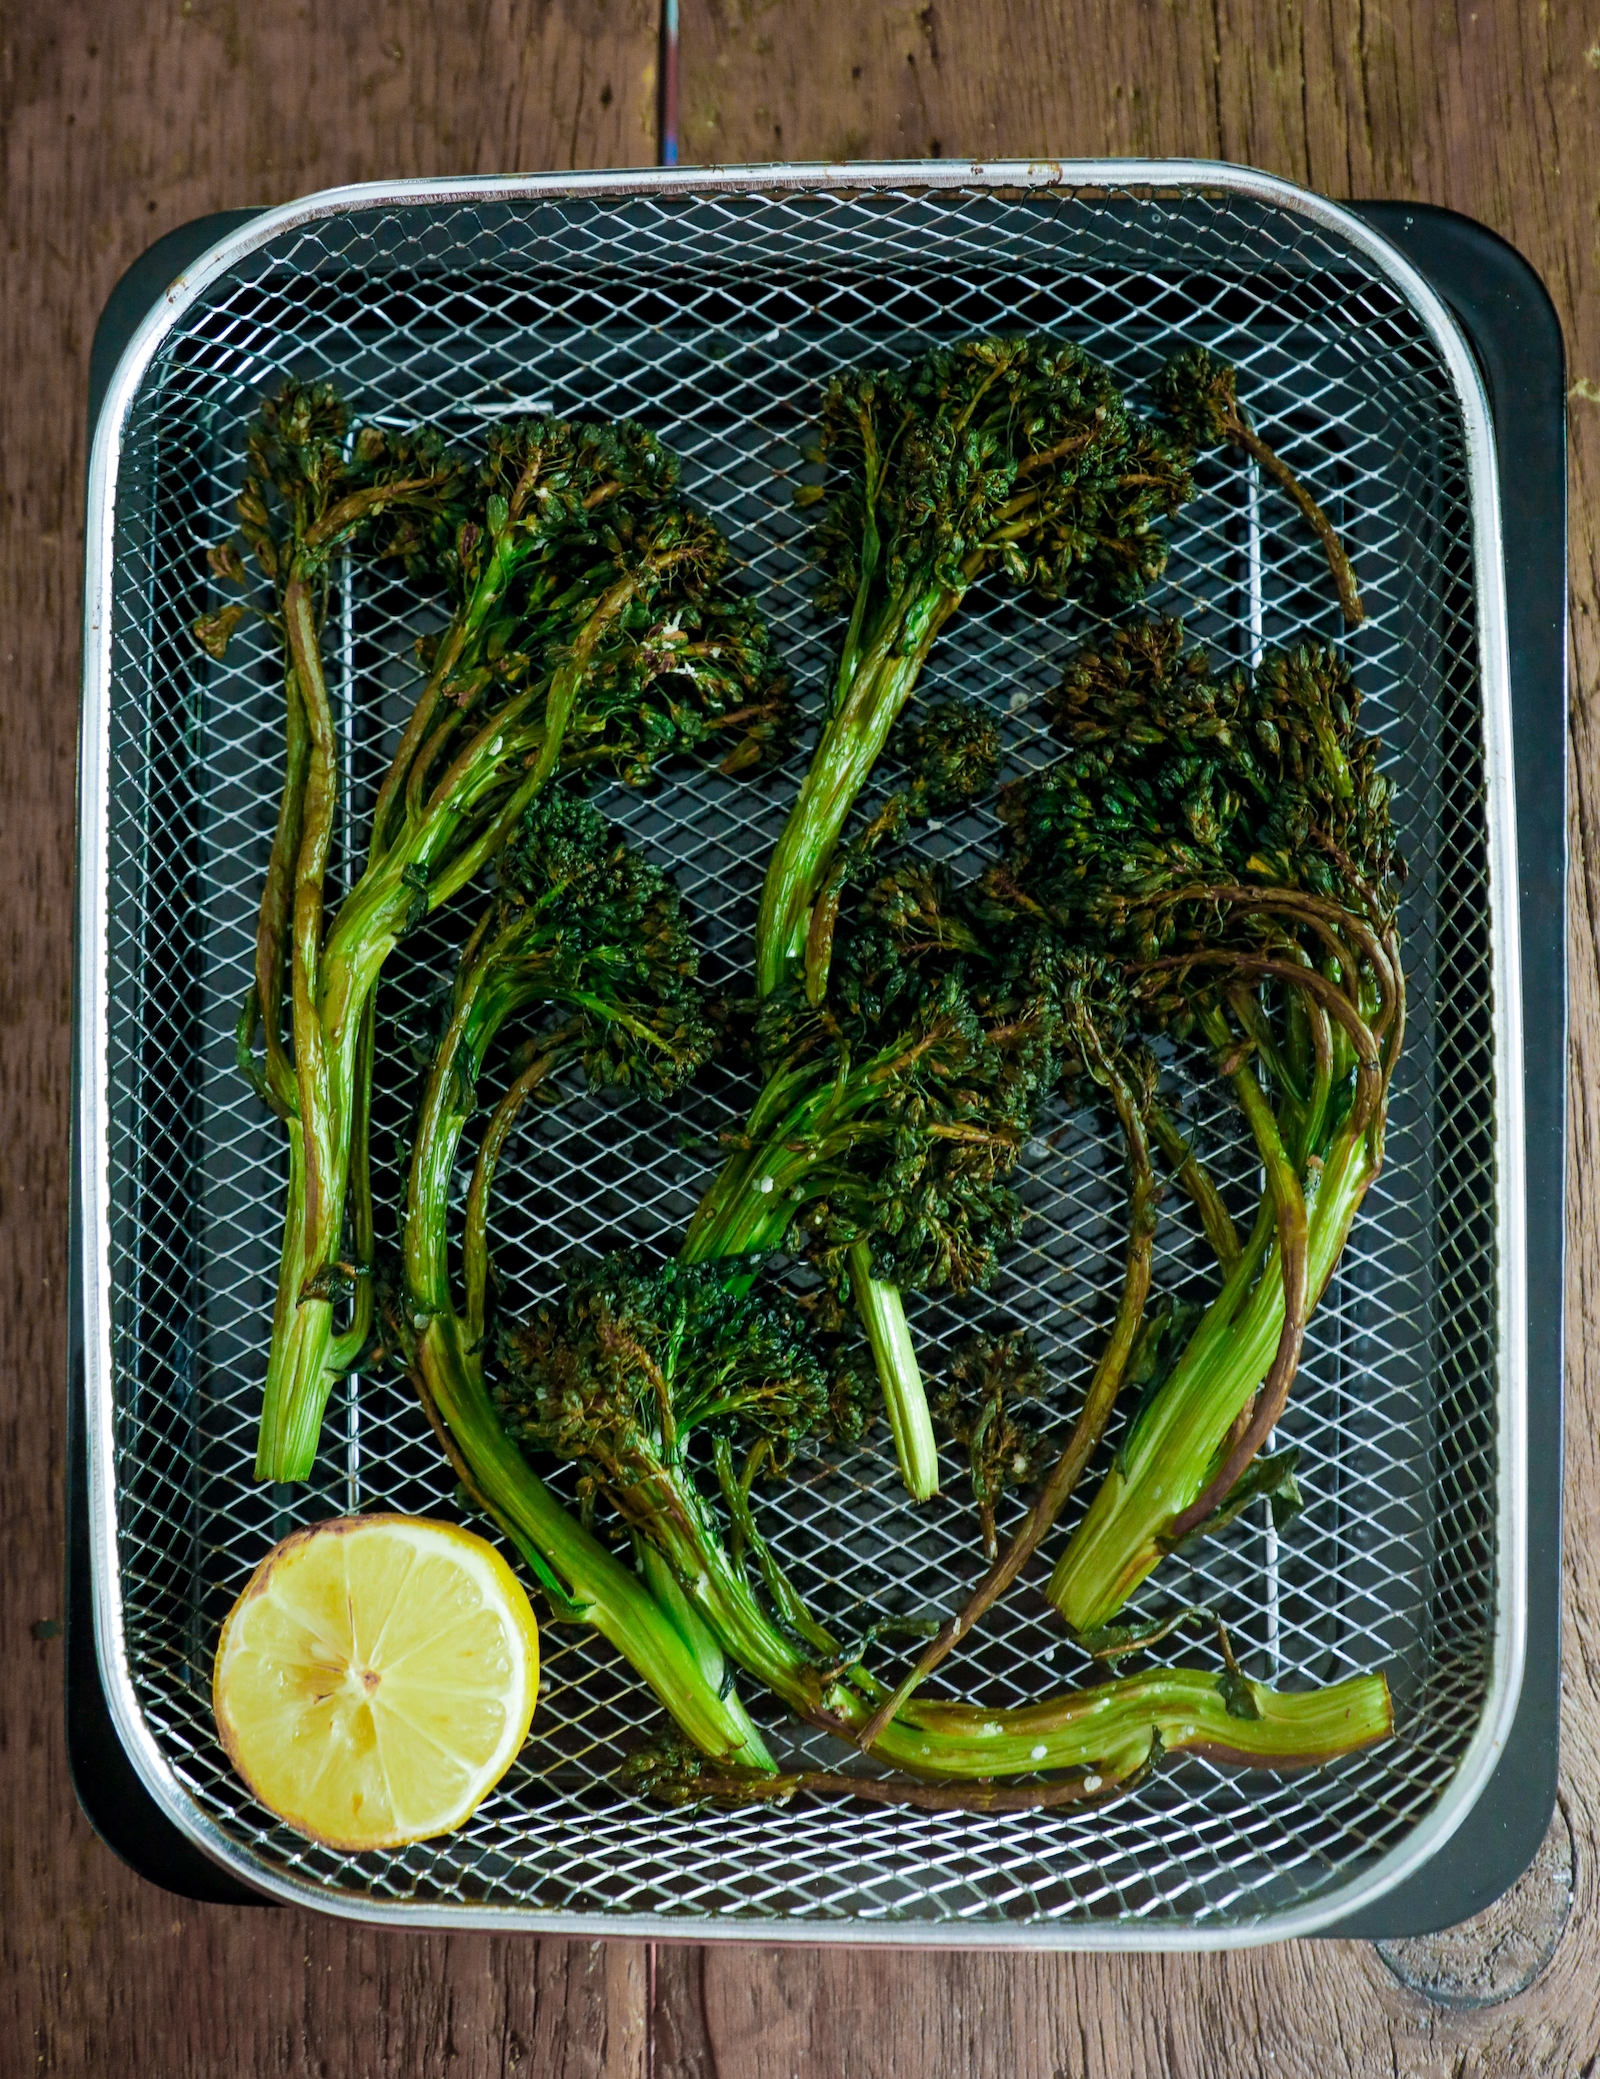 broccolini in the air fryer basket after cooking for 10 minutes at 400 degrees